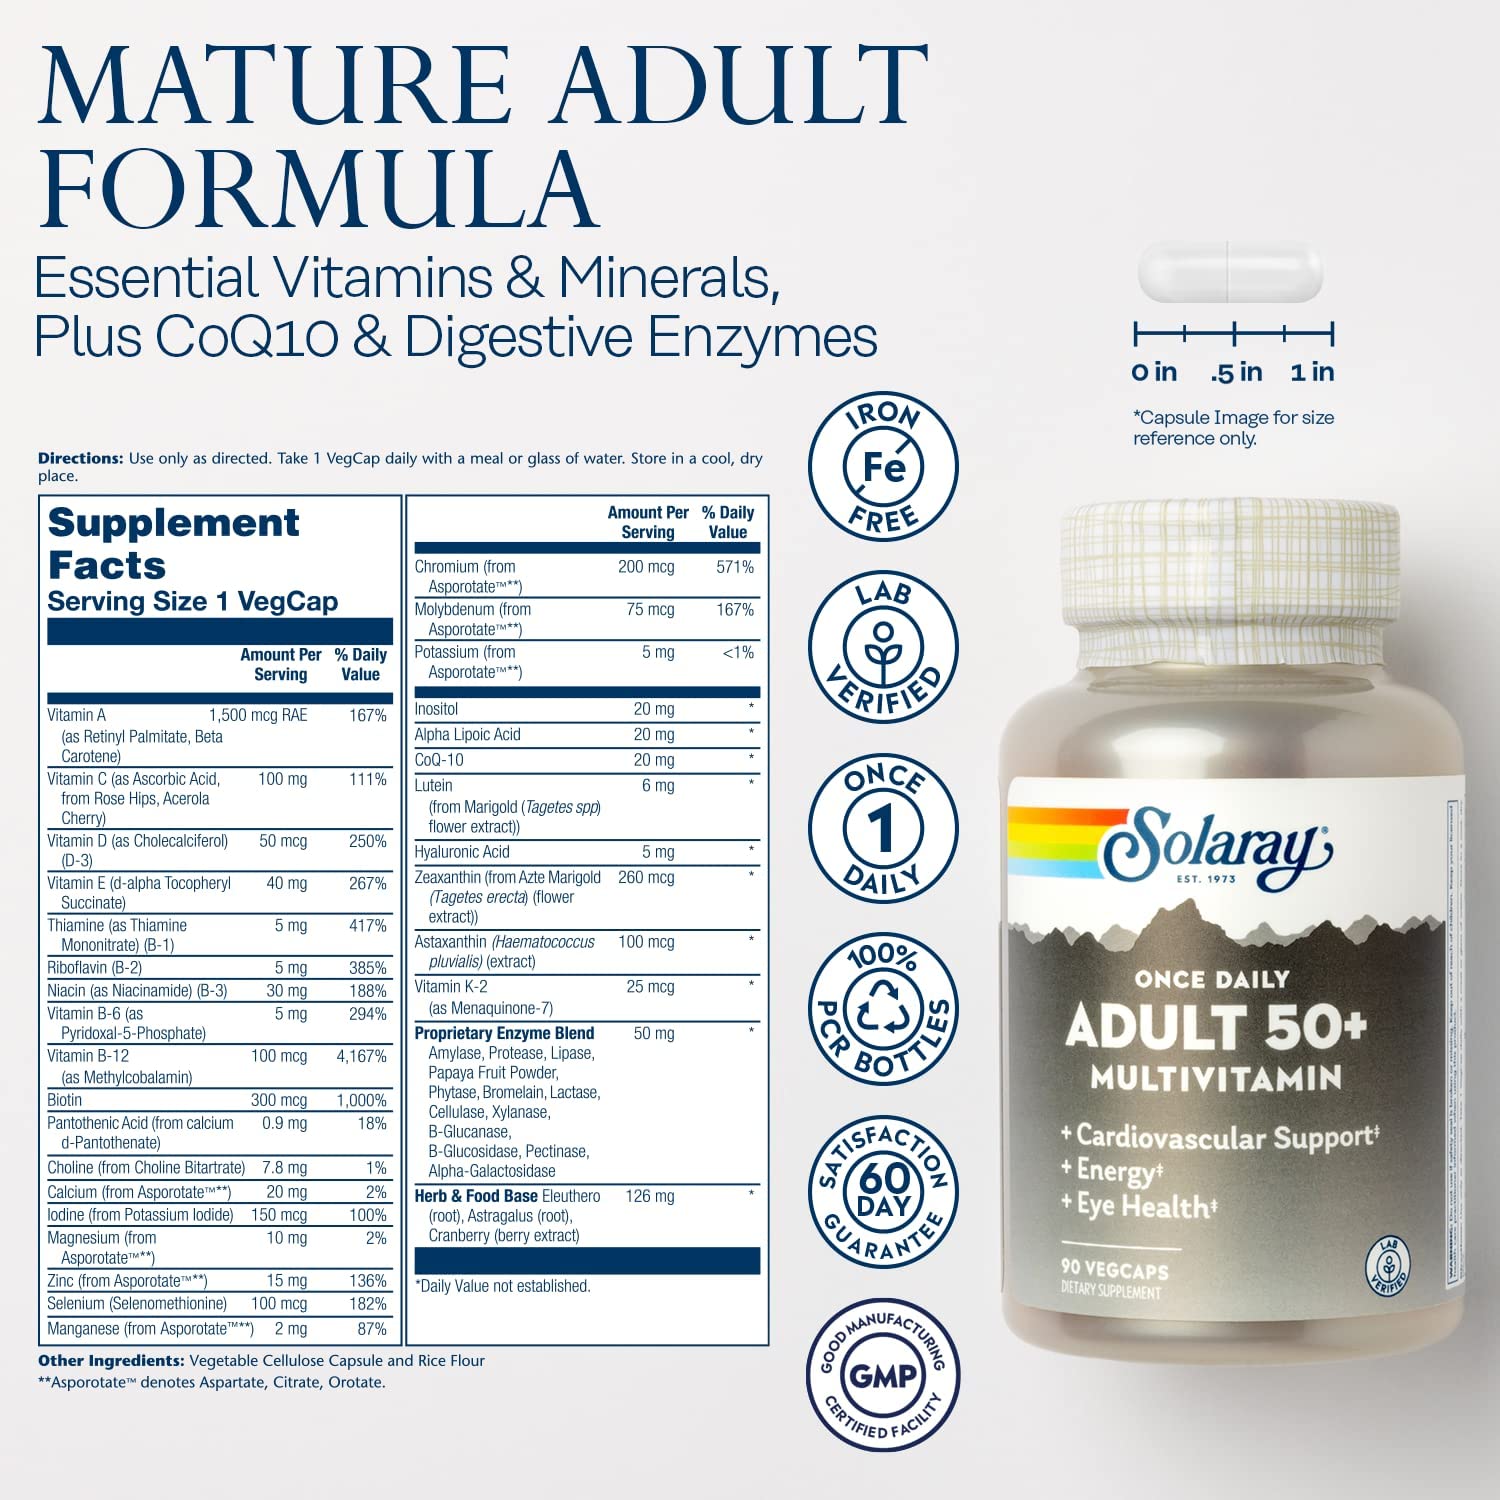 Solaray Once Daily Adult 50+ Multivitamin Healthy Energy, Heart & Immune Support for Mature Adults 90 Vegetable Capsules